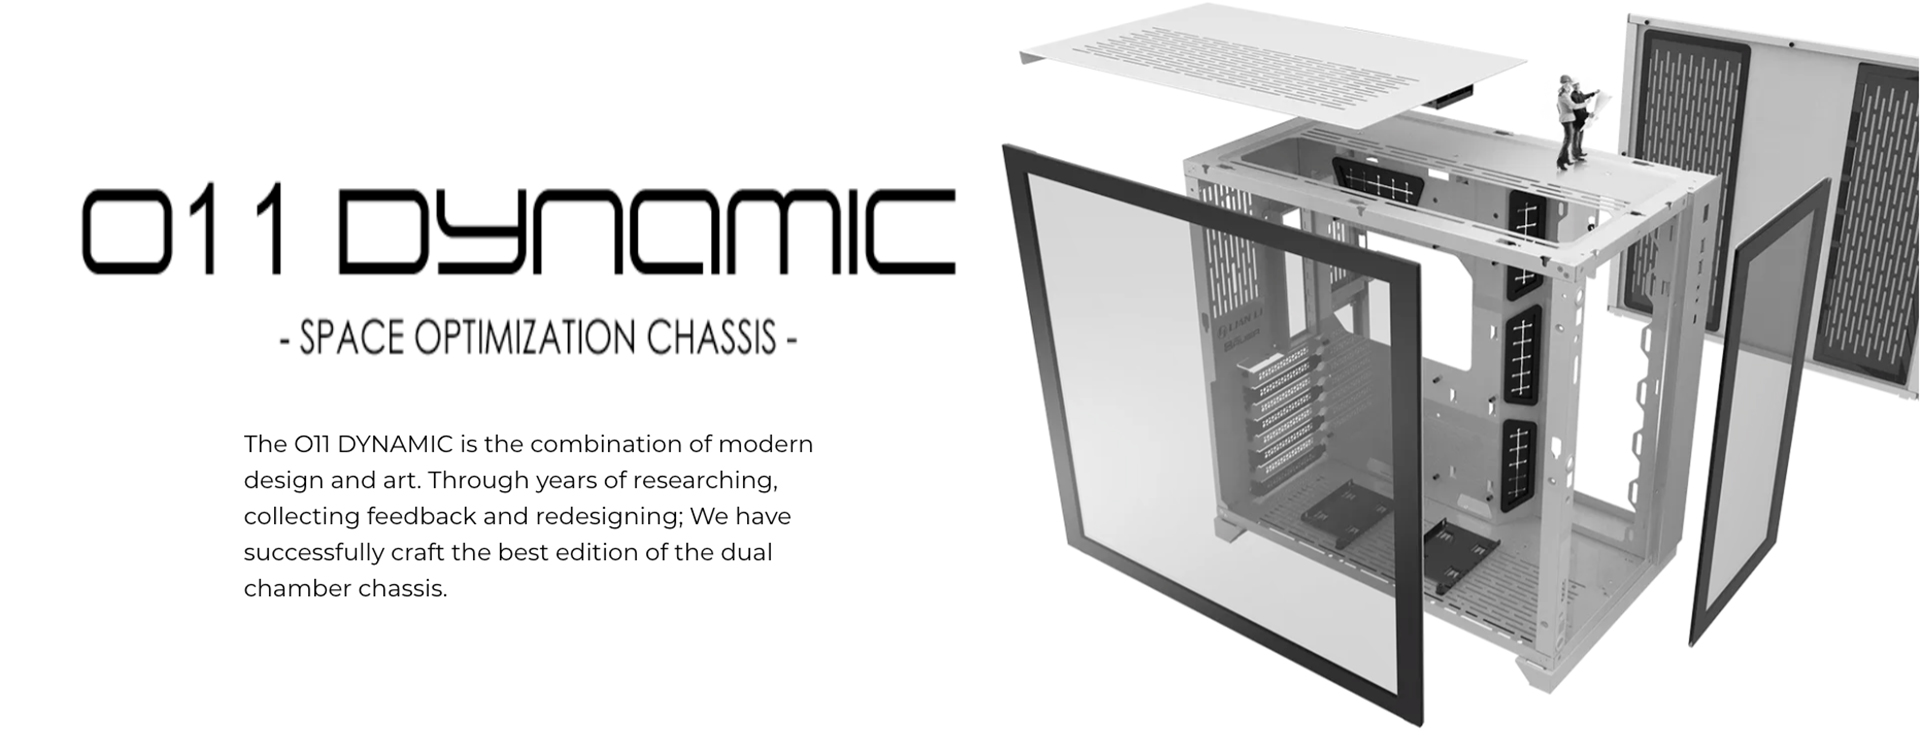 koolhydraat voorkant Leugen PC-O11DYNAMIC - Black Tempered Glass ATX Mid-Tower Computer Case